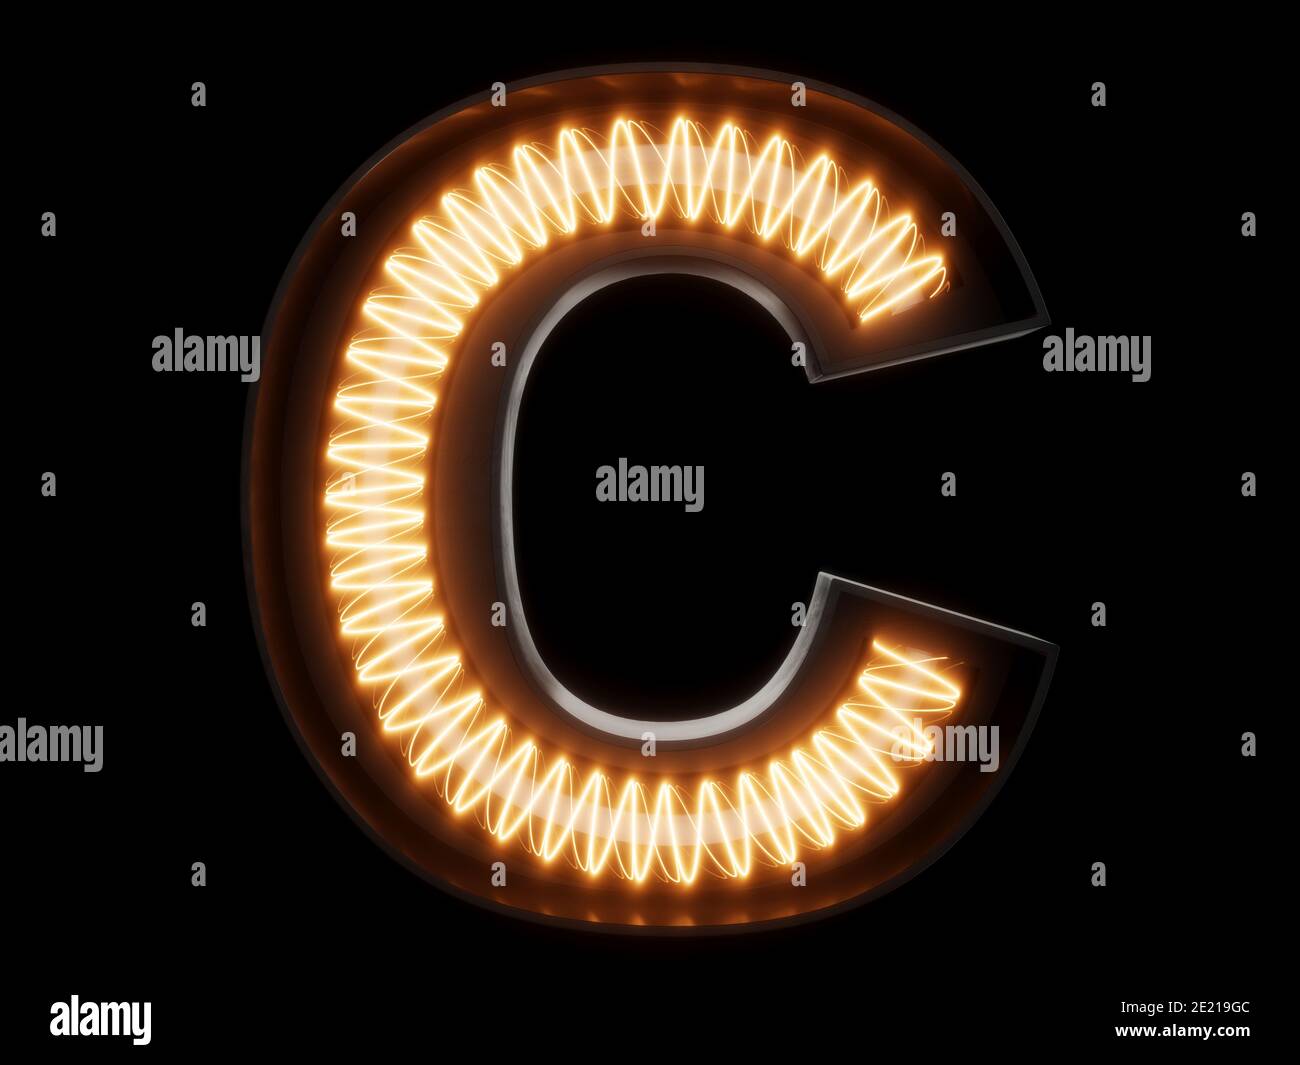 Light bulb glowing letter alphabet character C font. Front view illuminated capital symbol on black background. 3d rendering illustration Stock Photo